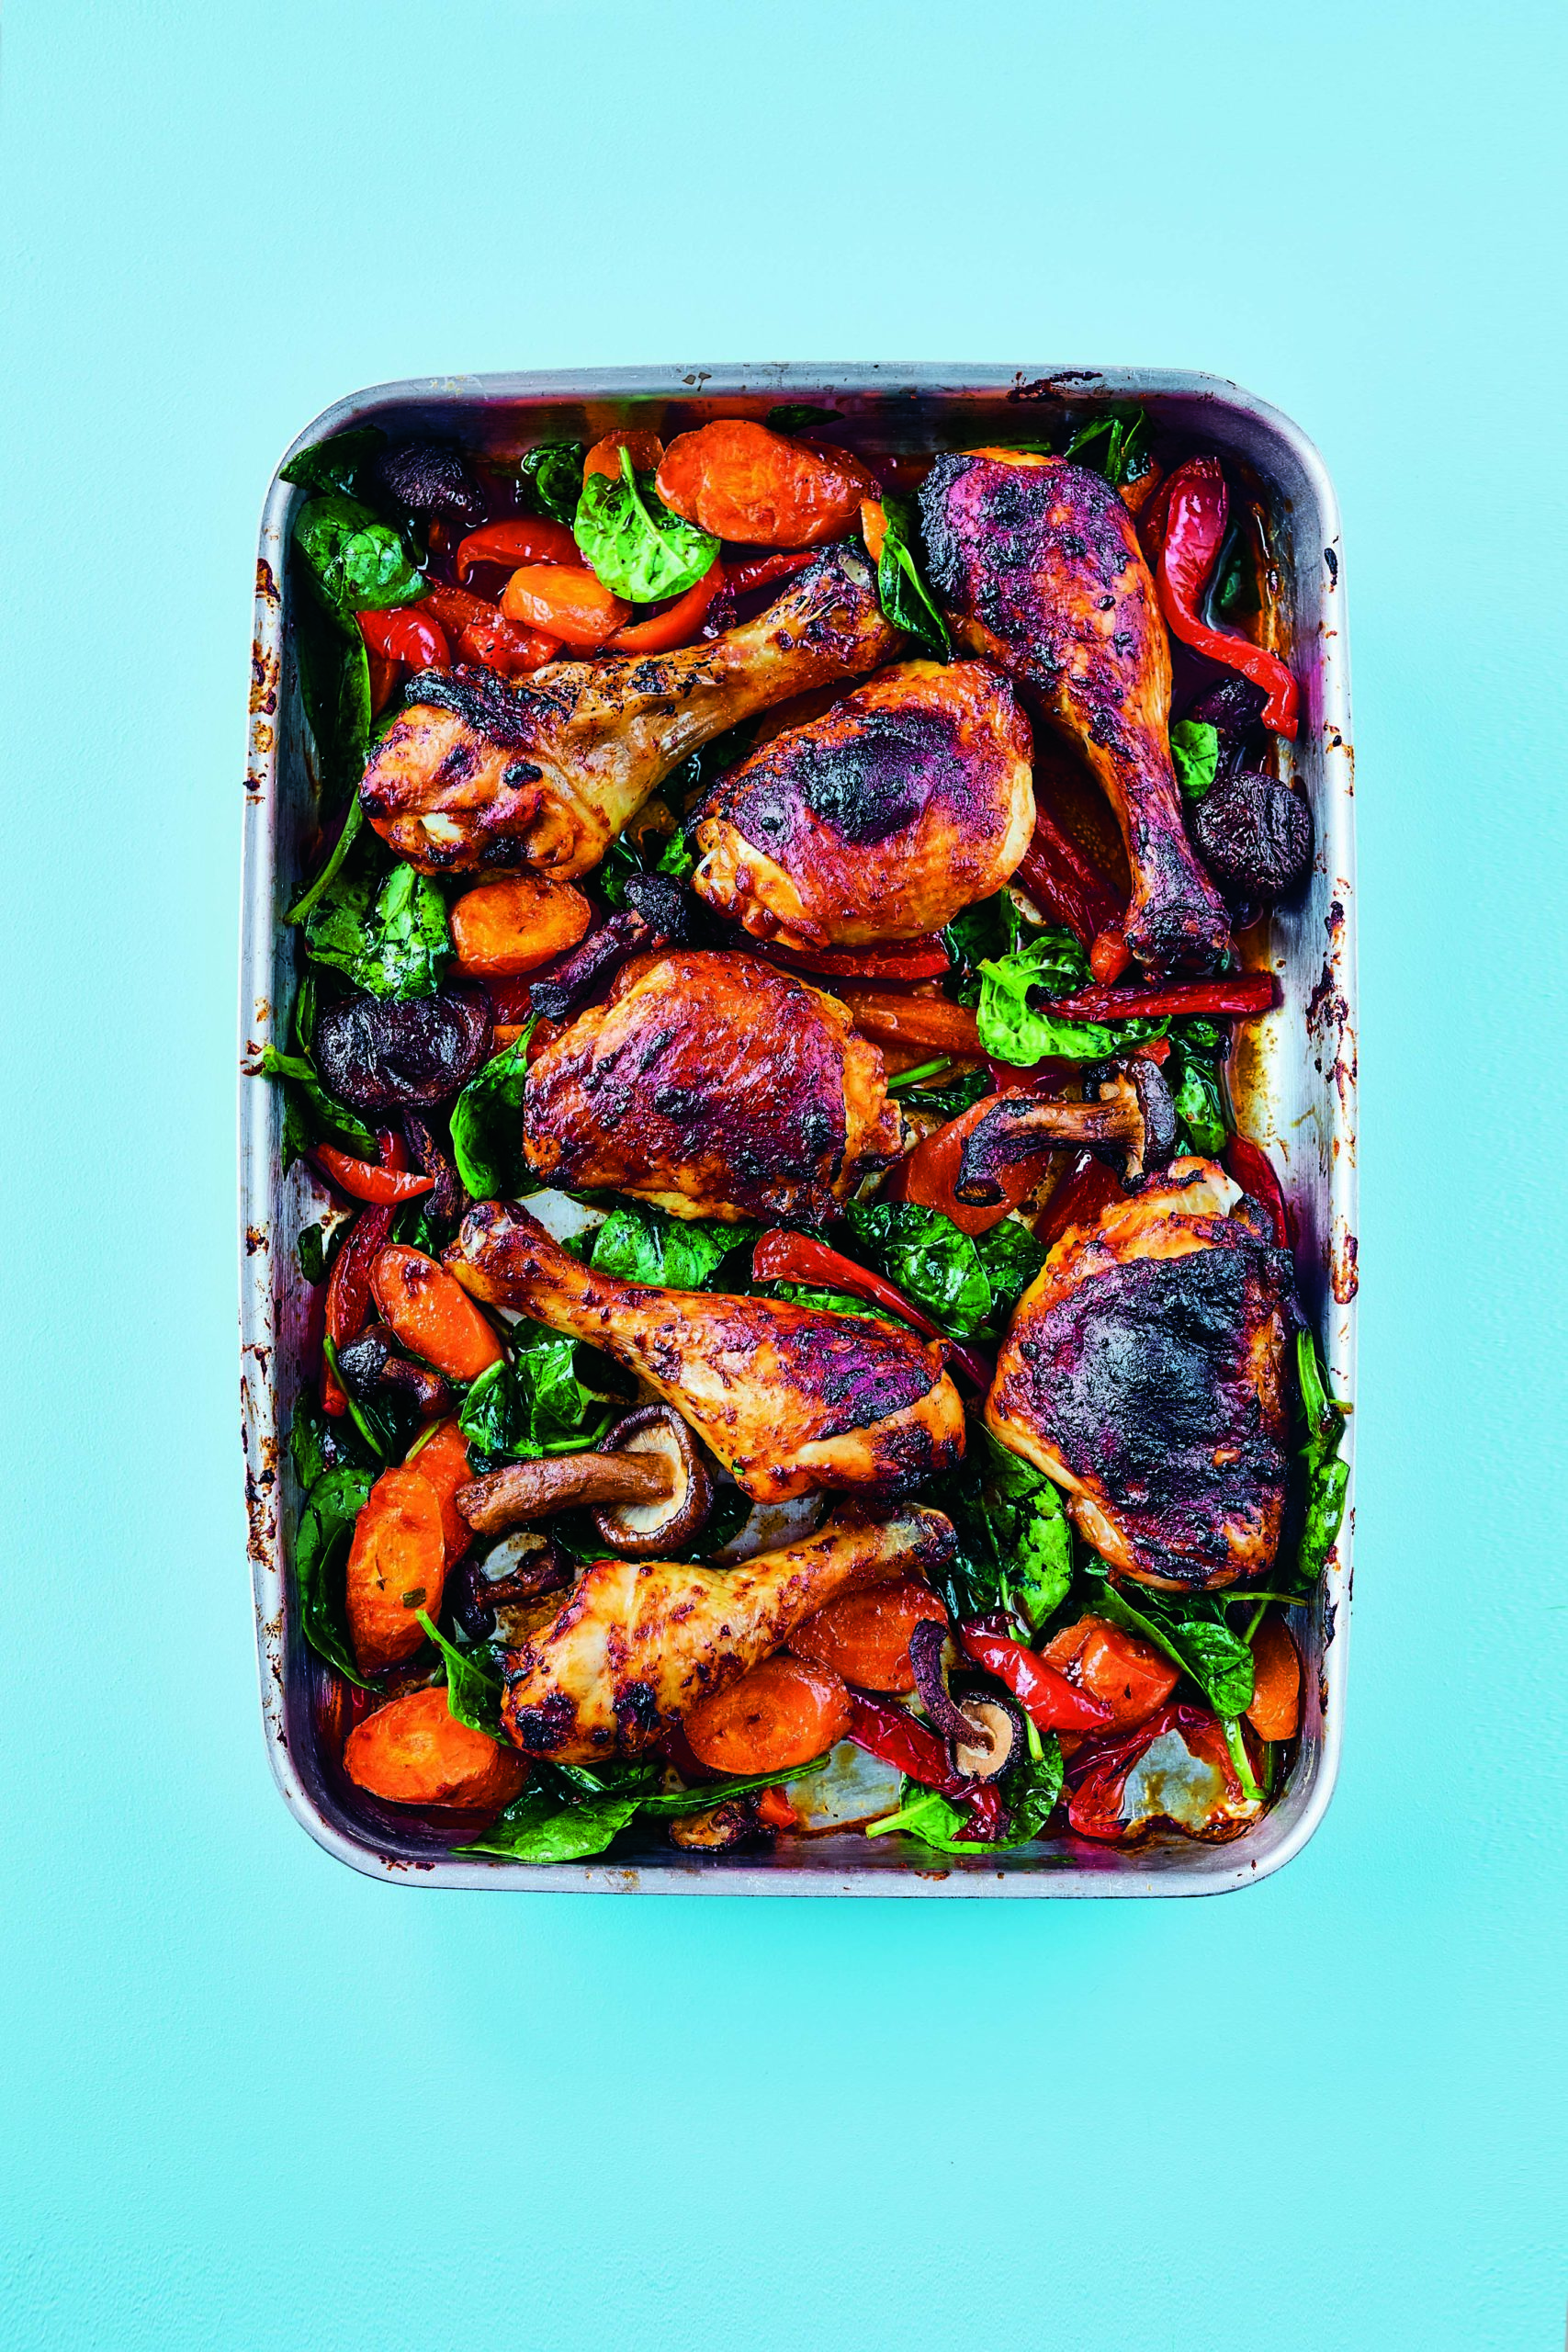 Rukmini Iyer’s Korean Barbecue-Style Chicken, Peppers, Carrots, and Spinach